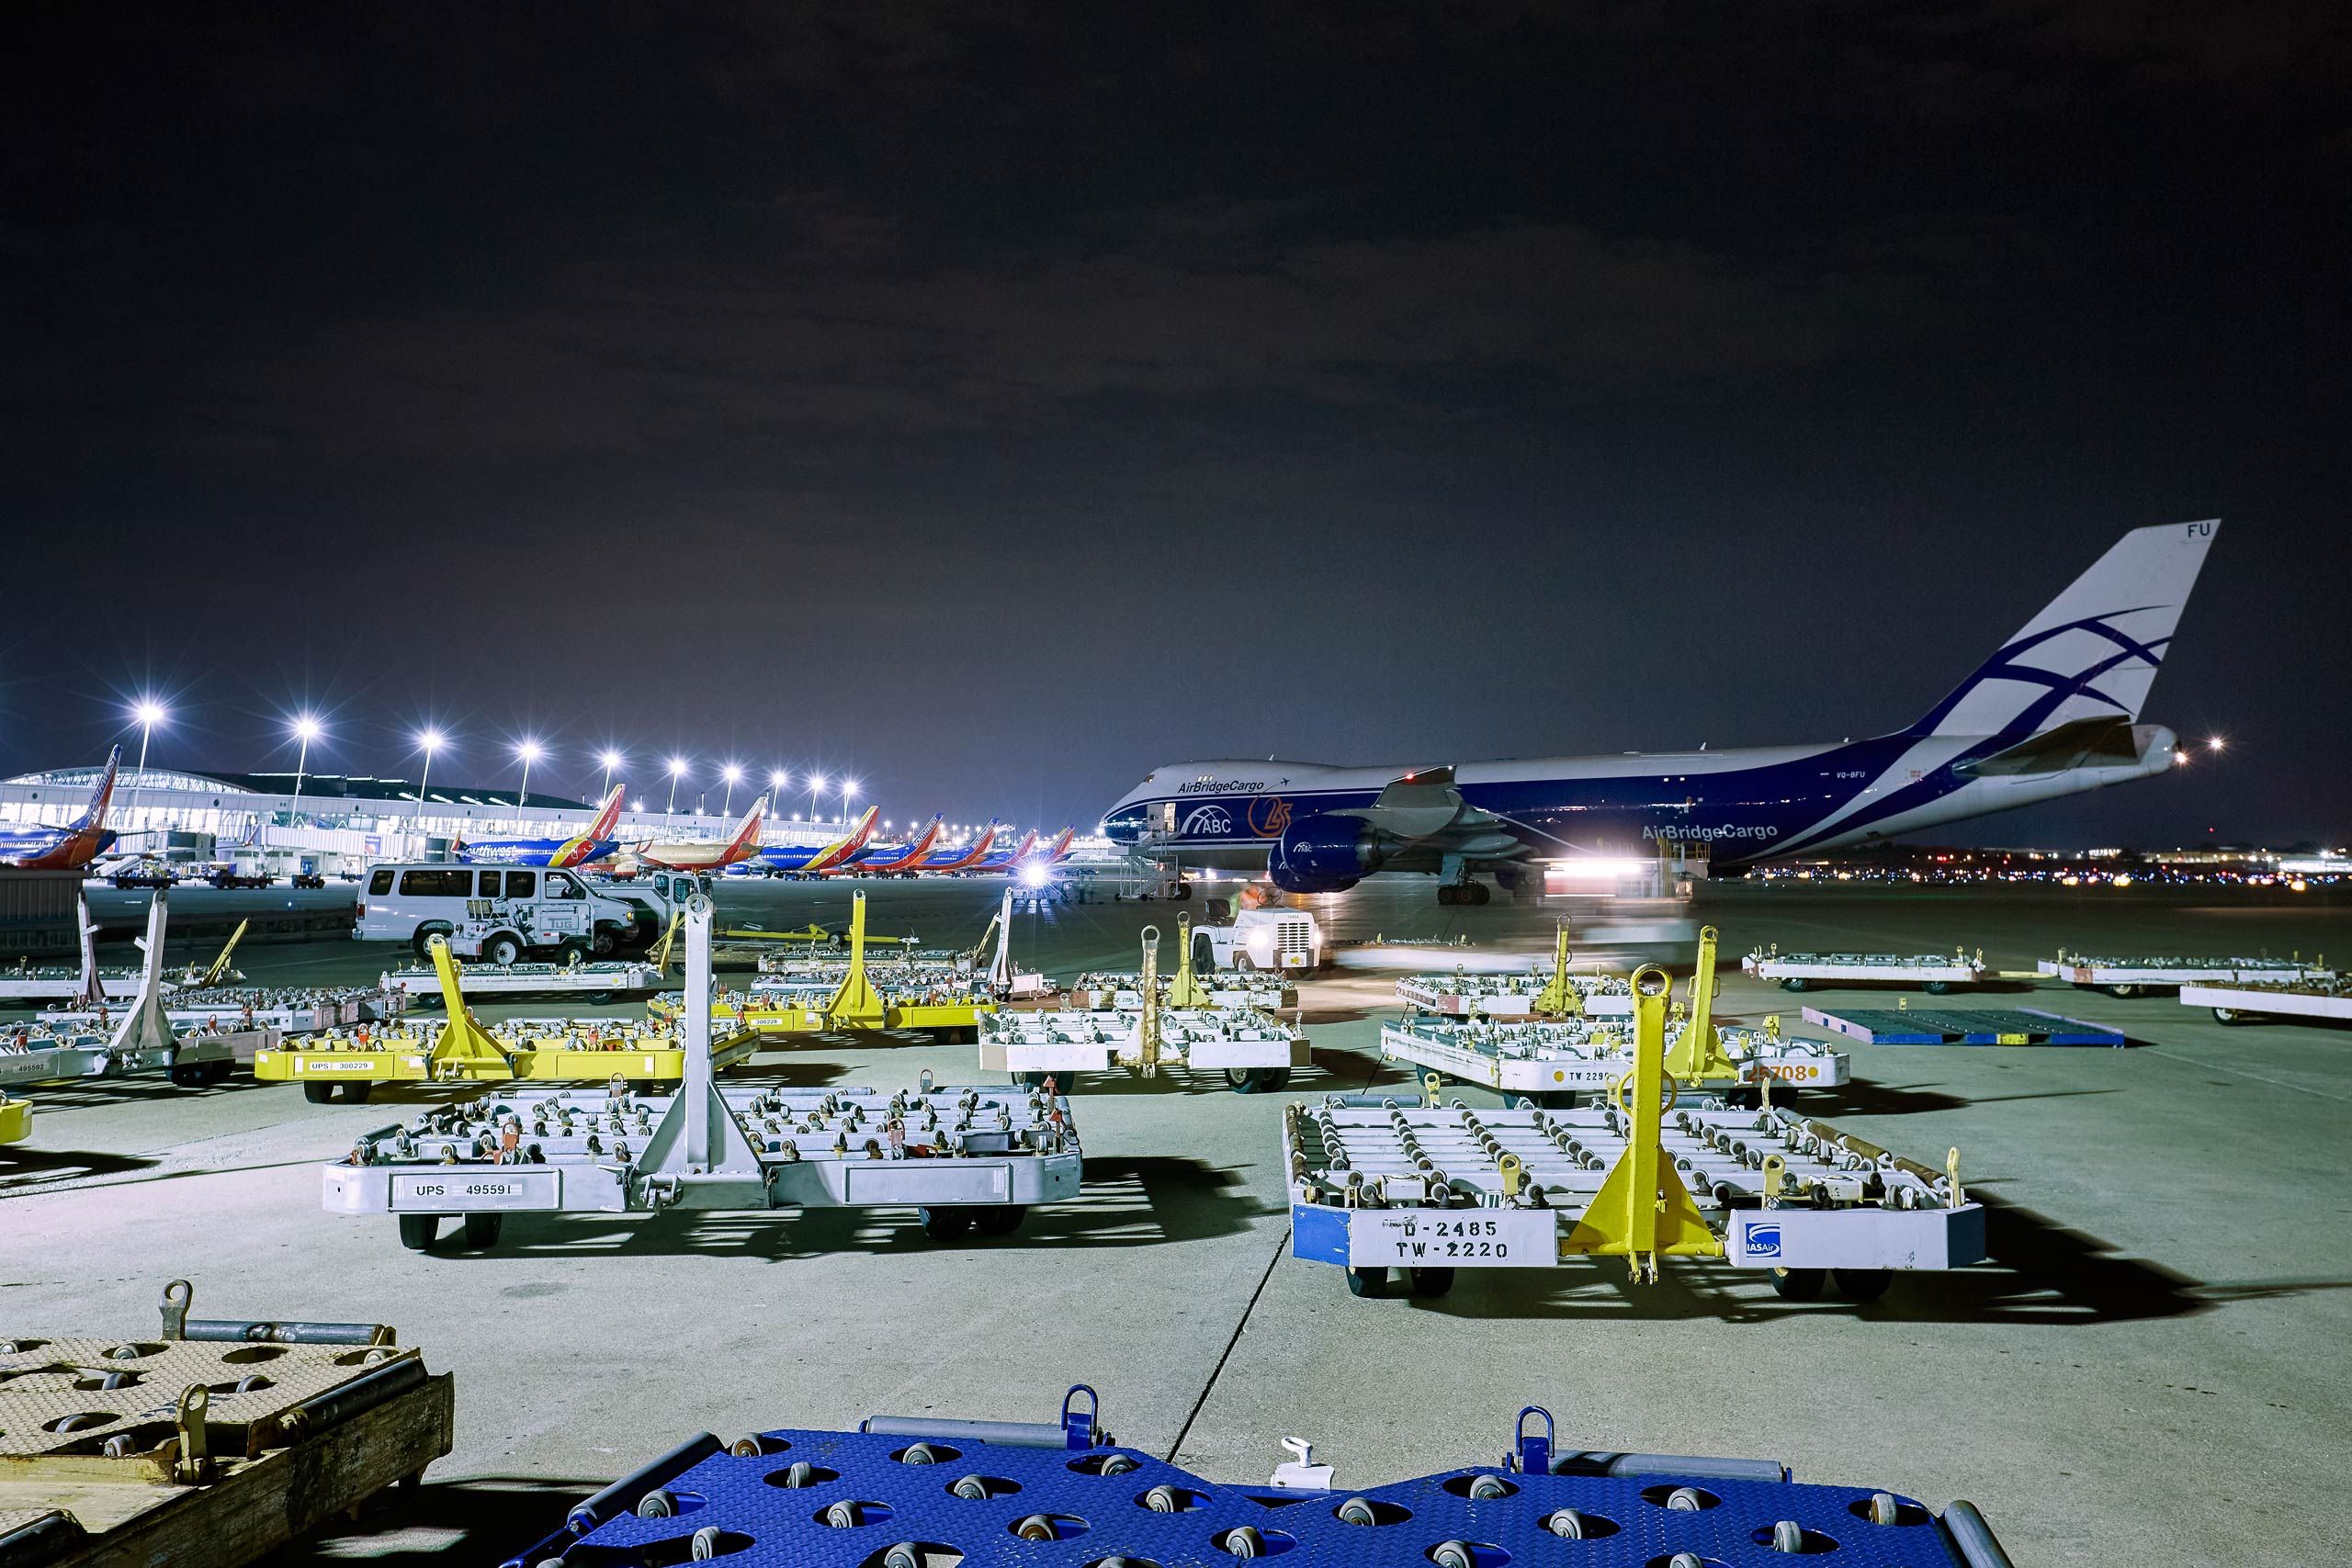 Wide View of a Boeing 747 Aircraft With Empty Cargo Handling Equipment in the Foreground